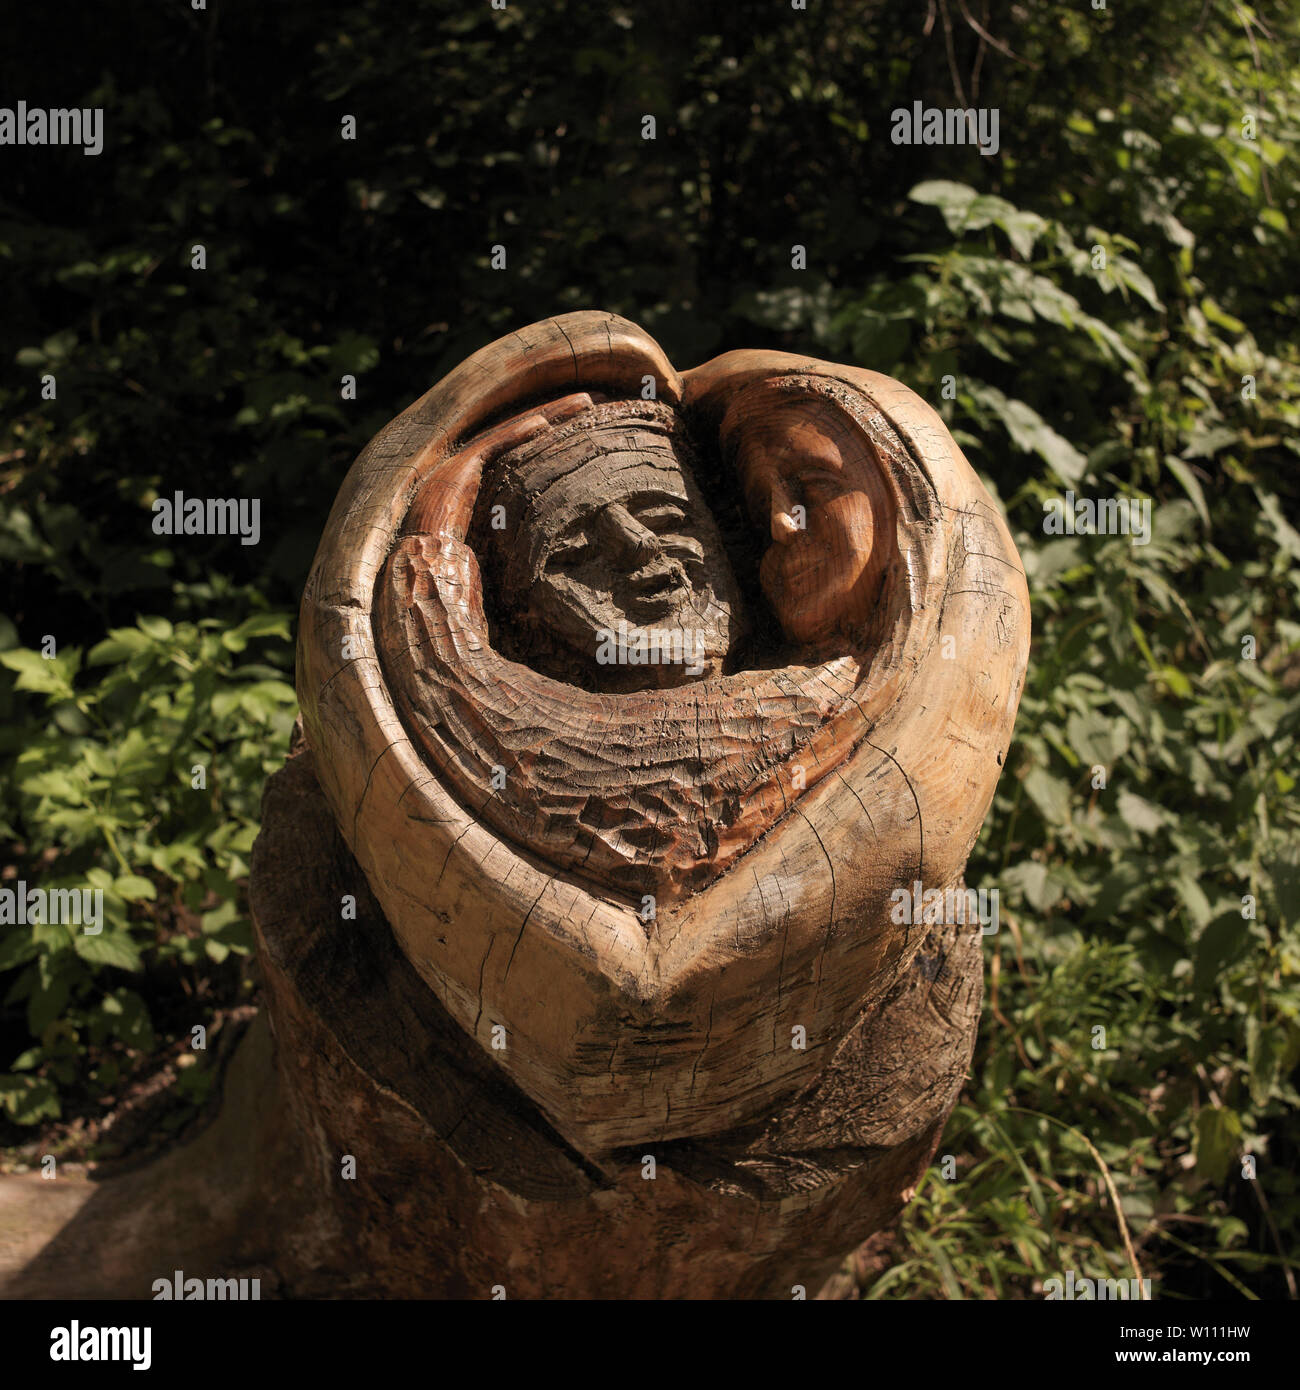 Ayas, Aosta Valley, Italy - August 10, 2006: Tree trunk carved along a mountain path. Stock Photo